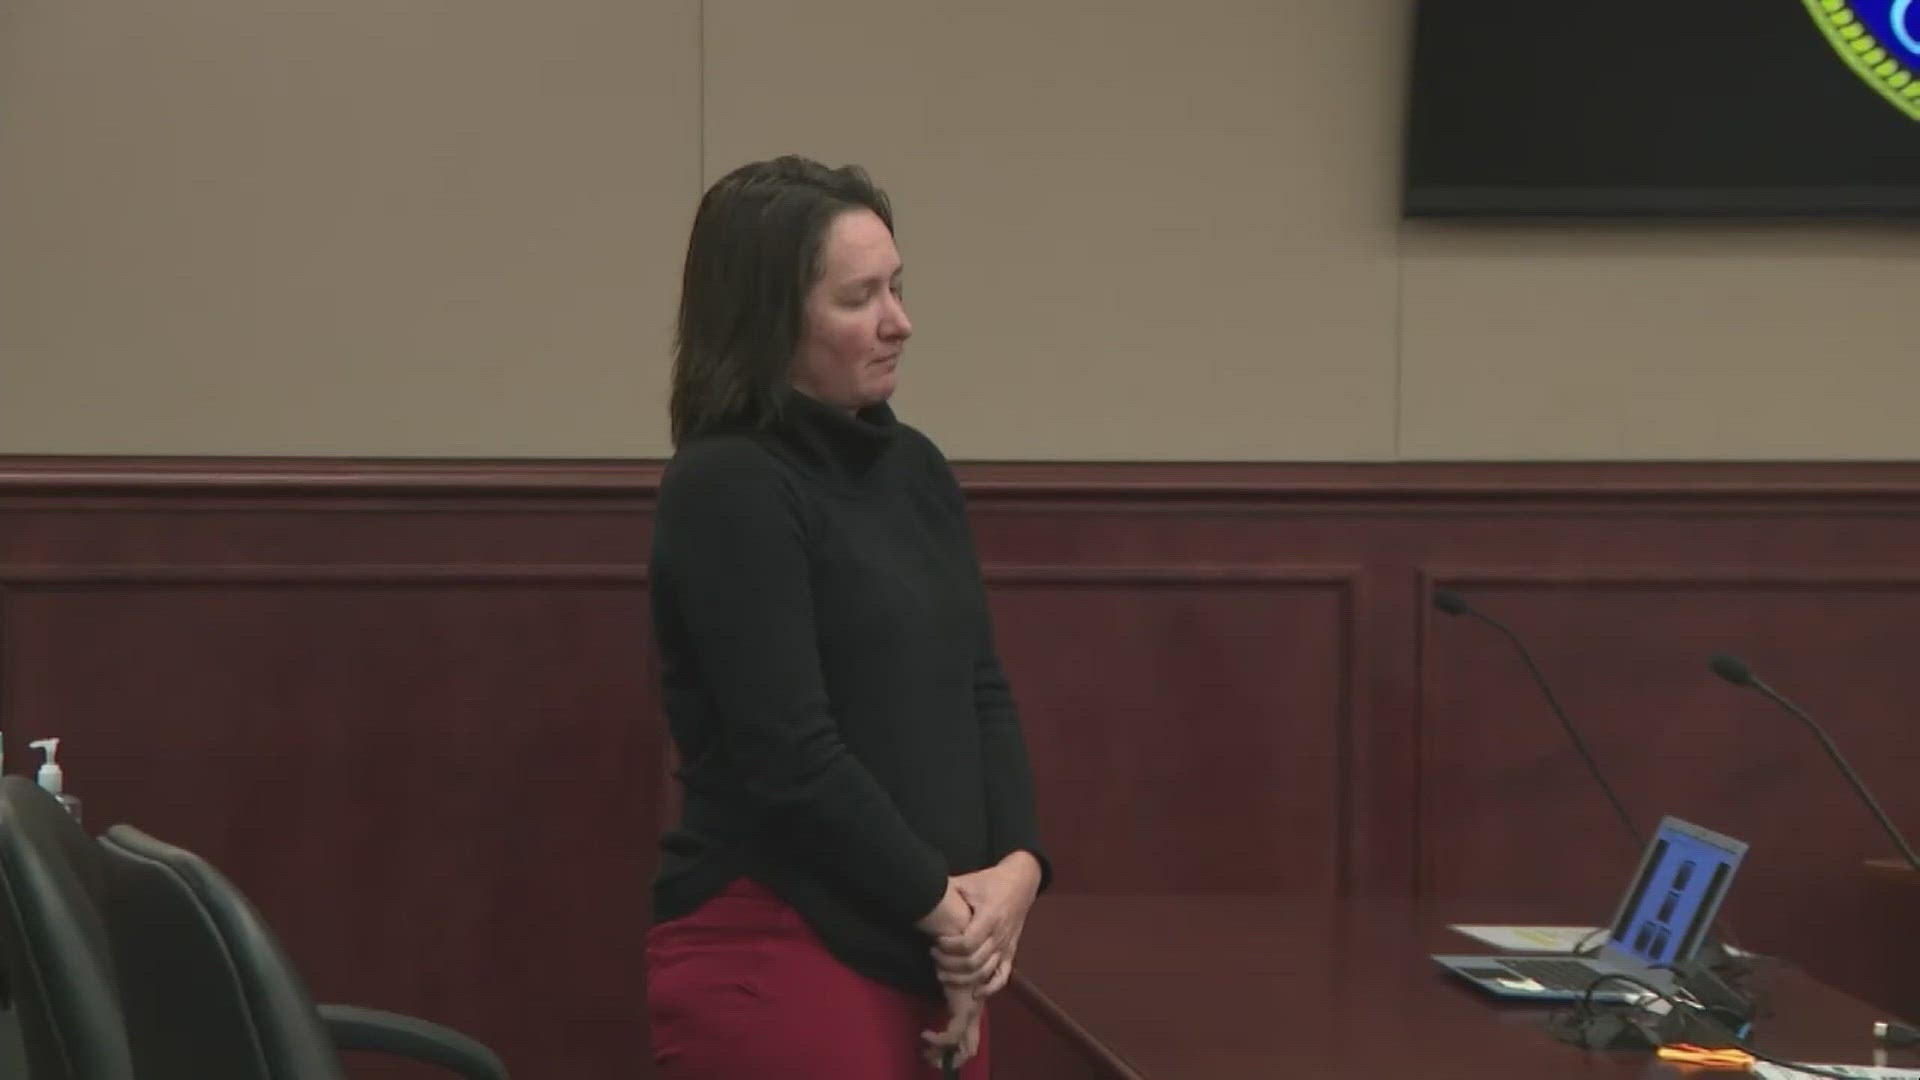 Robin Niceta faces charges related to accusations that she faked cancer in an effort to delay her trial for making a false child abuse claim.